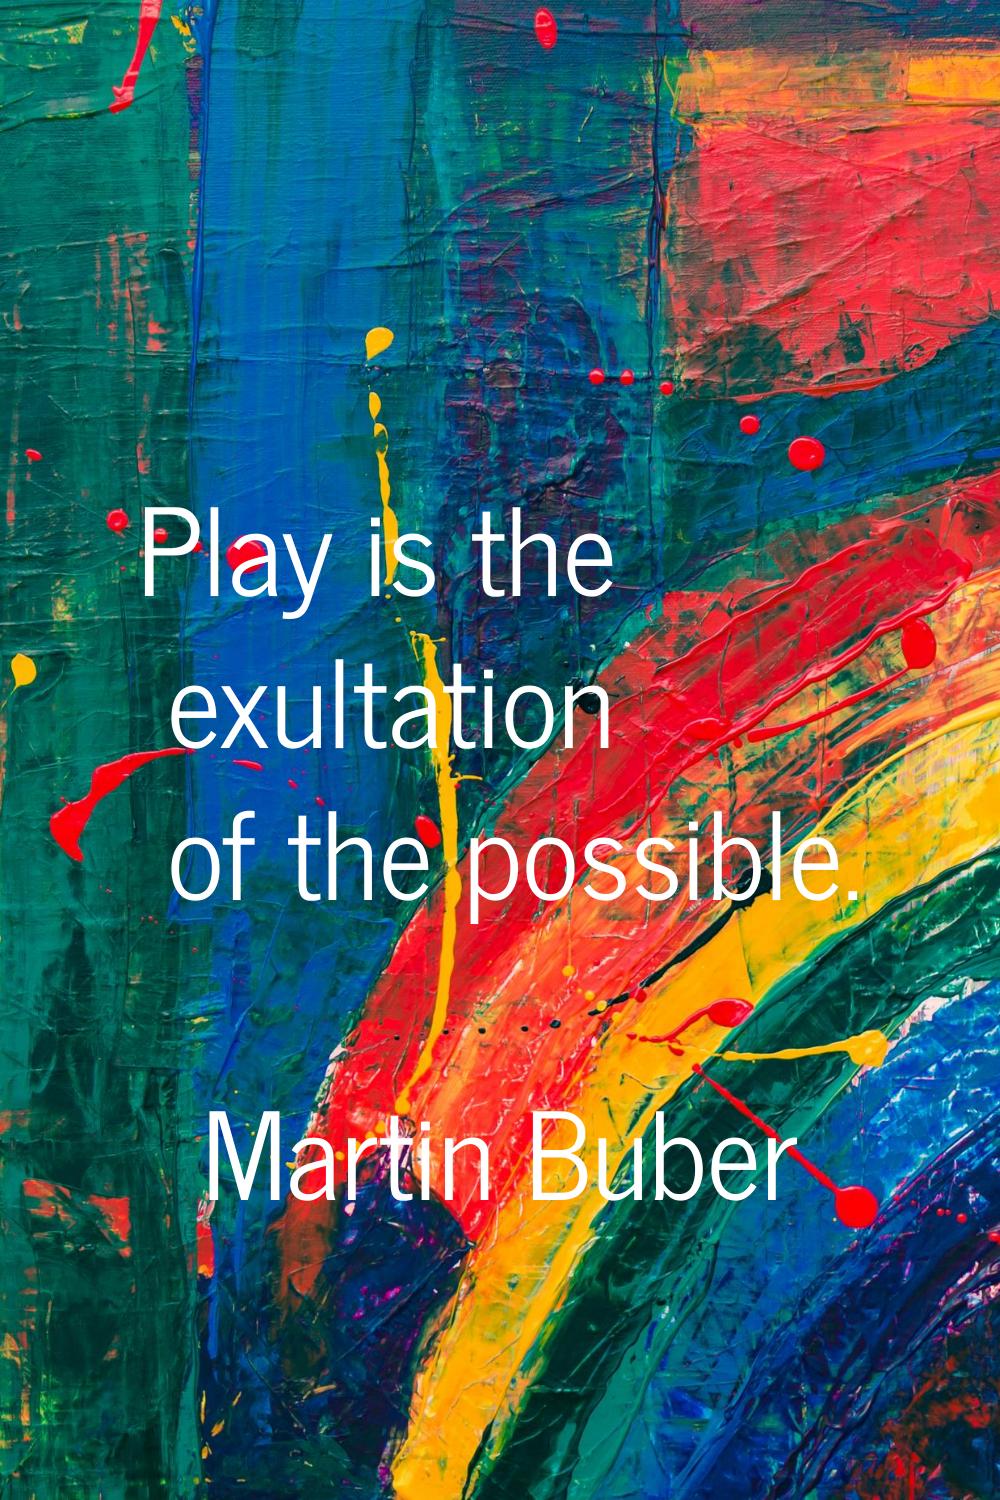 Play is the exultation of the possible.